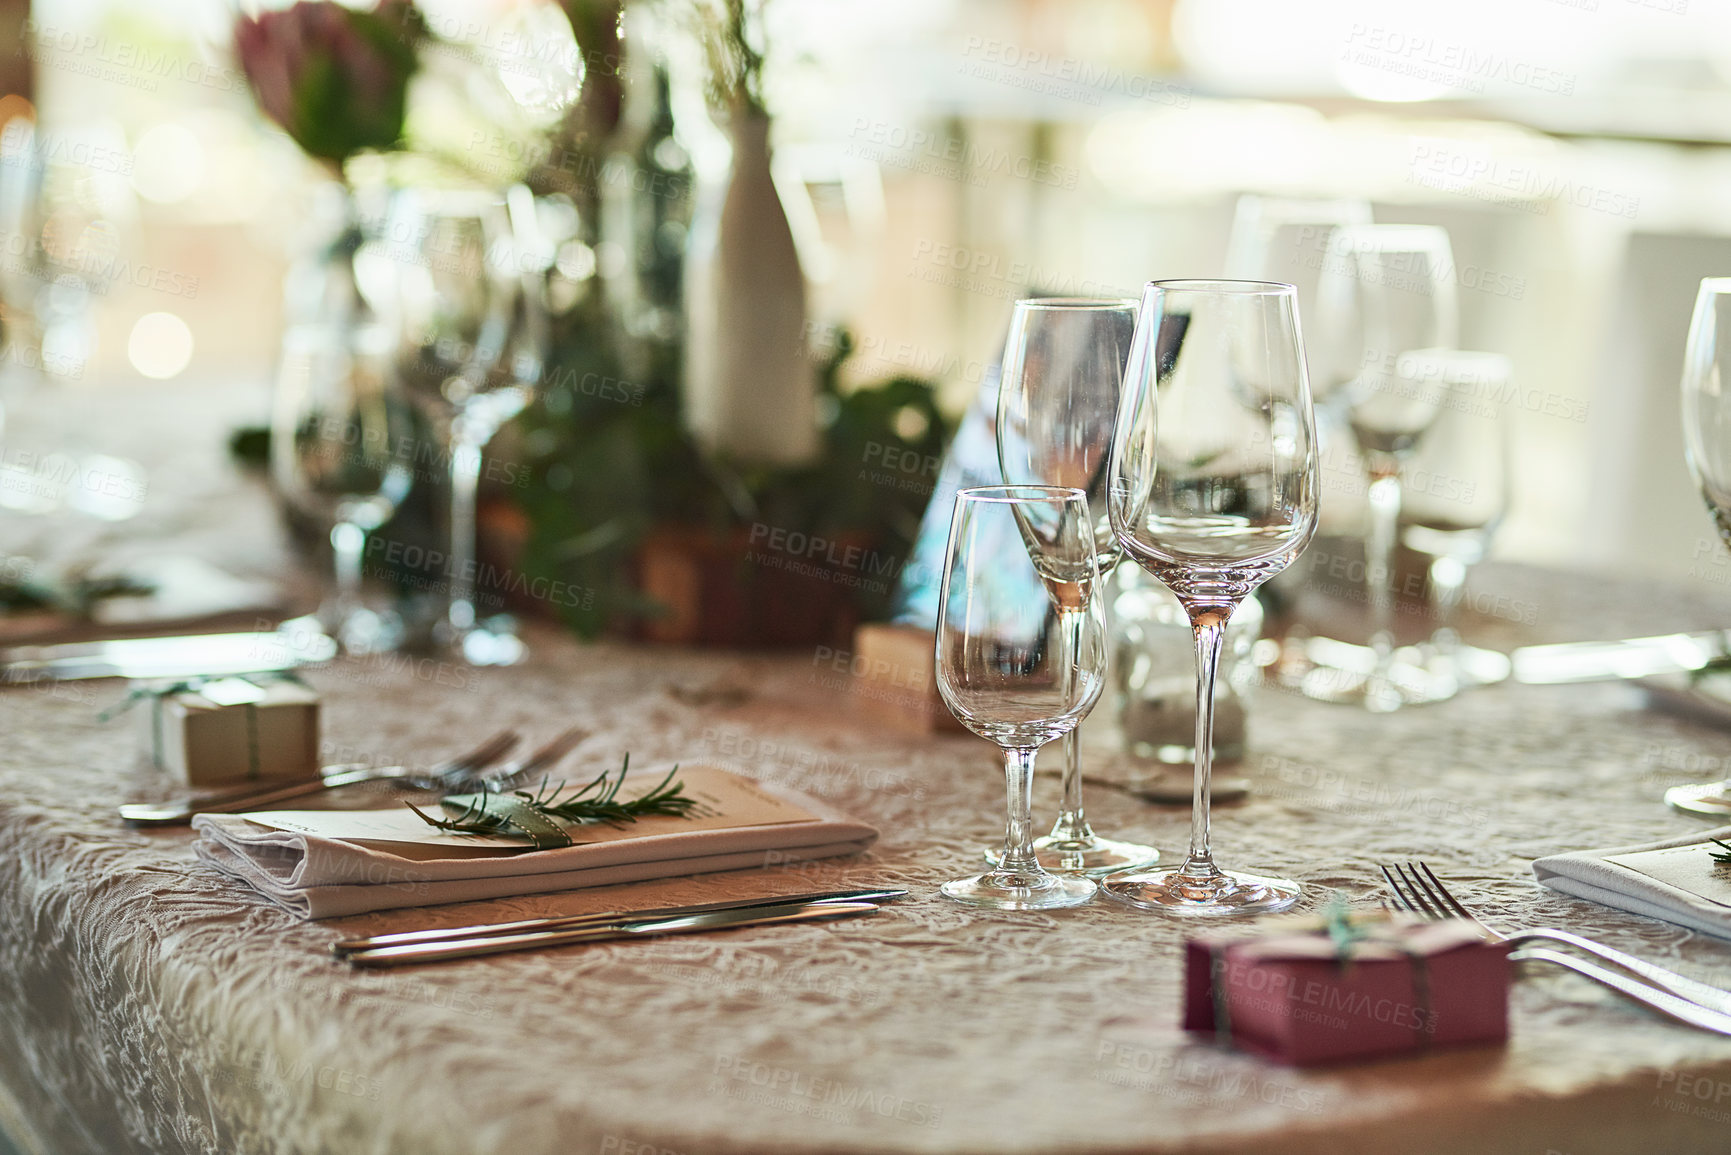 Buy stock photo Shot of a nicely set table with cutlery and crockery placed together inside of a building during the day